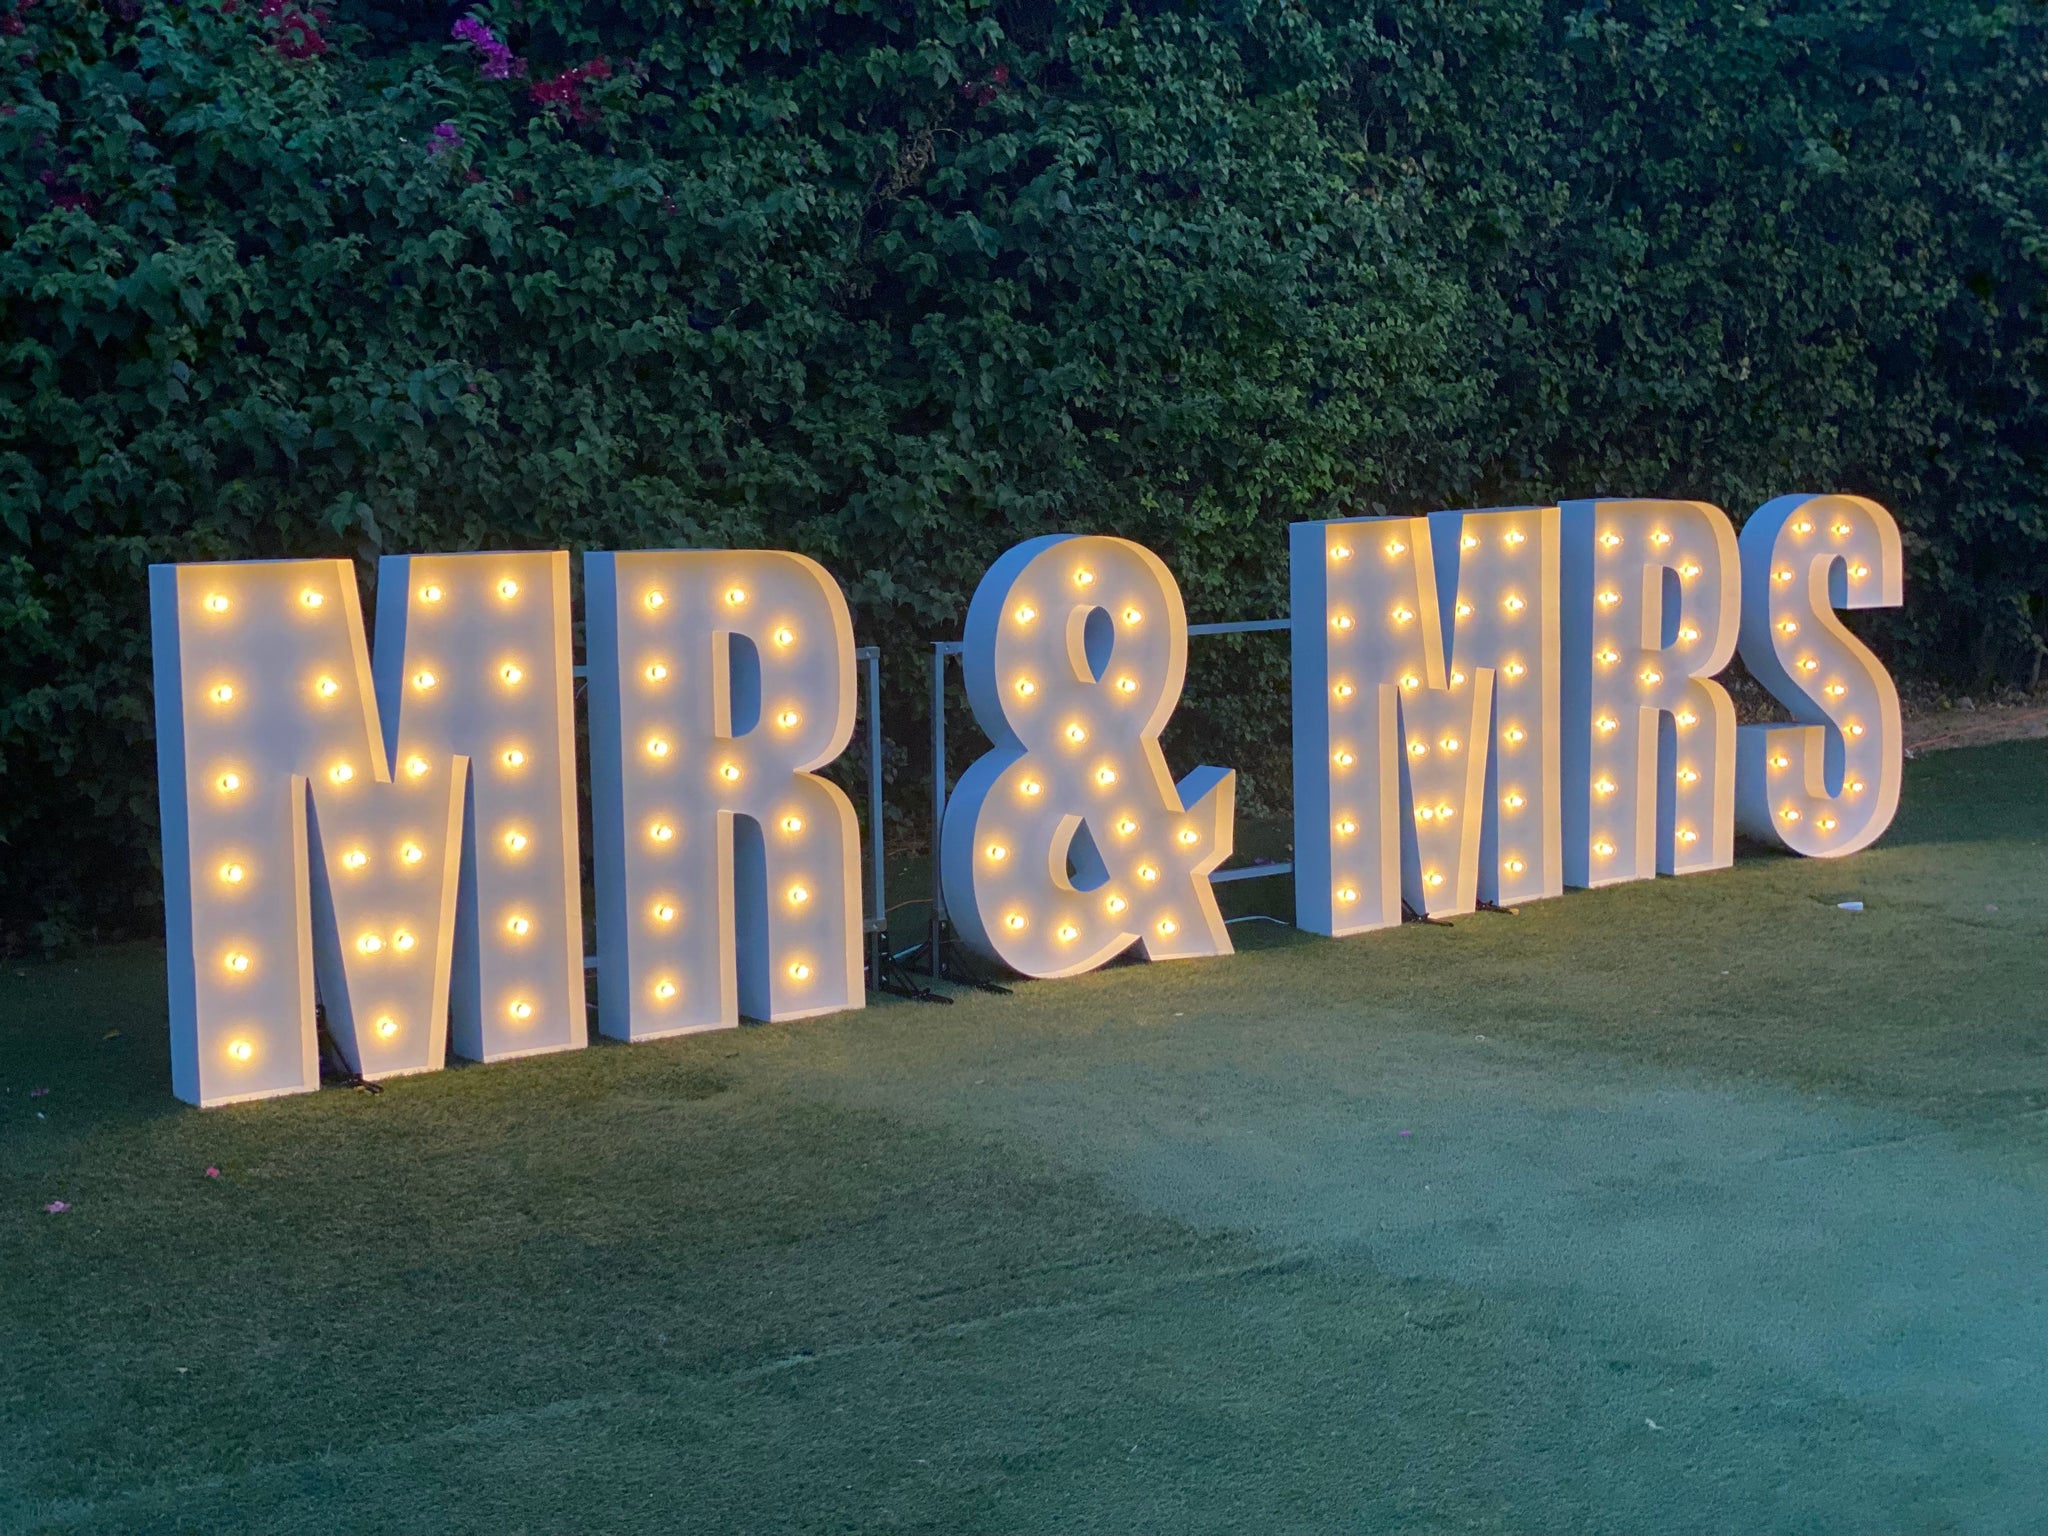 4FT Marquee Light Up Letter R